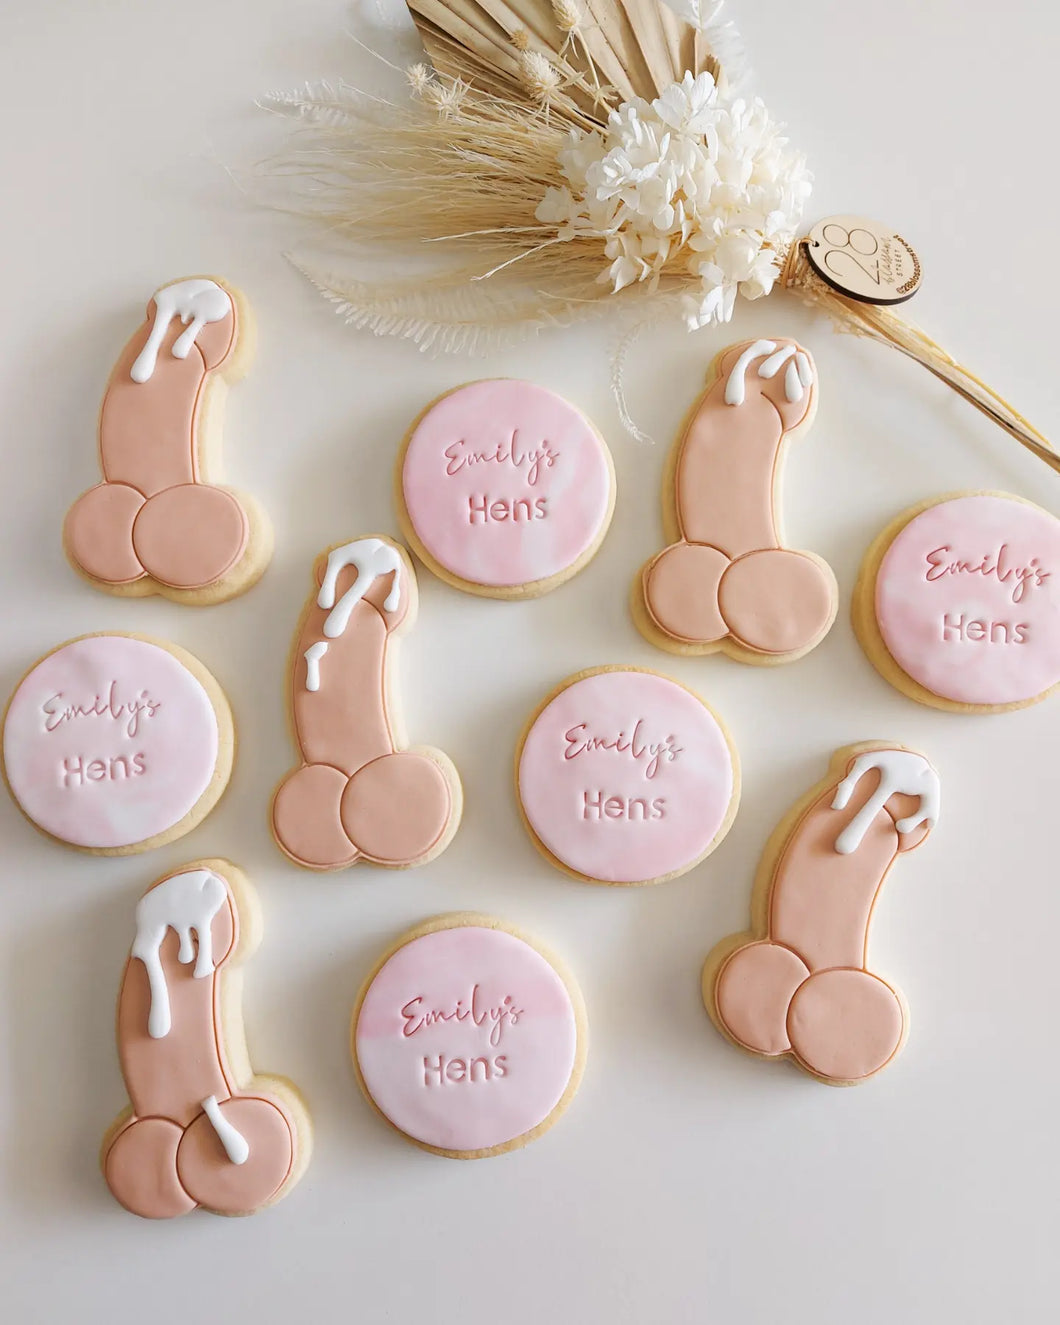 Naughty Hens Party Cookies